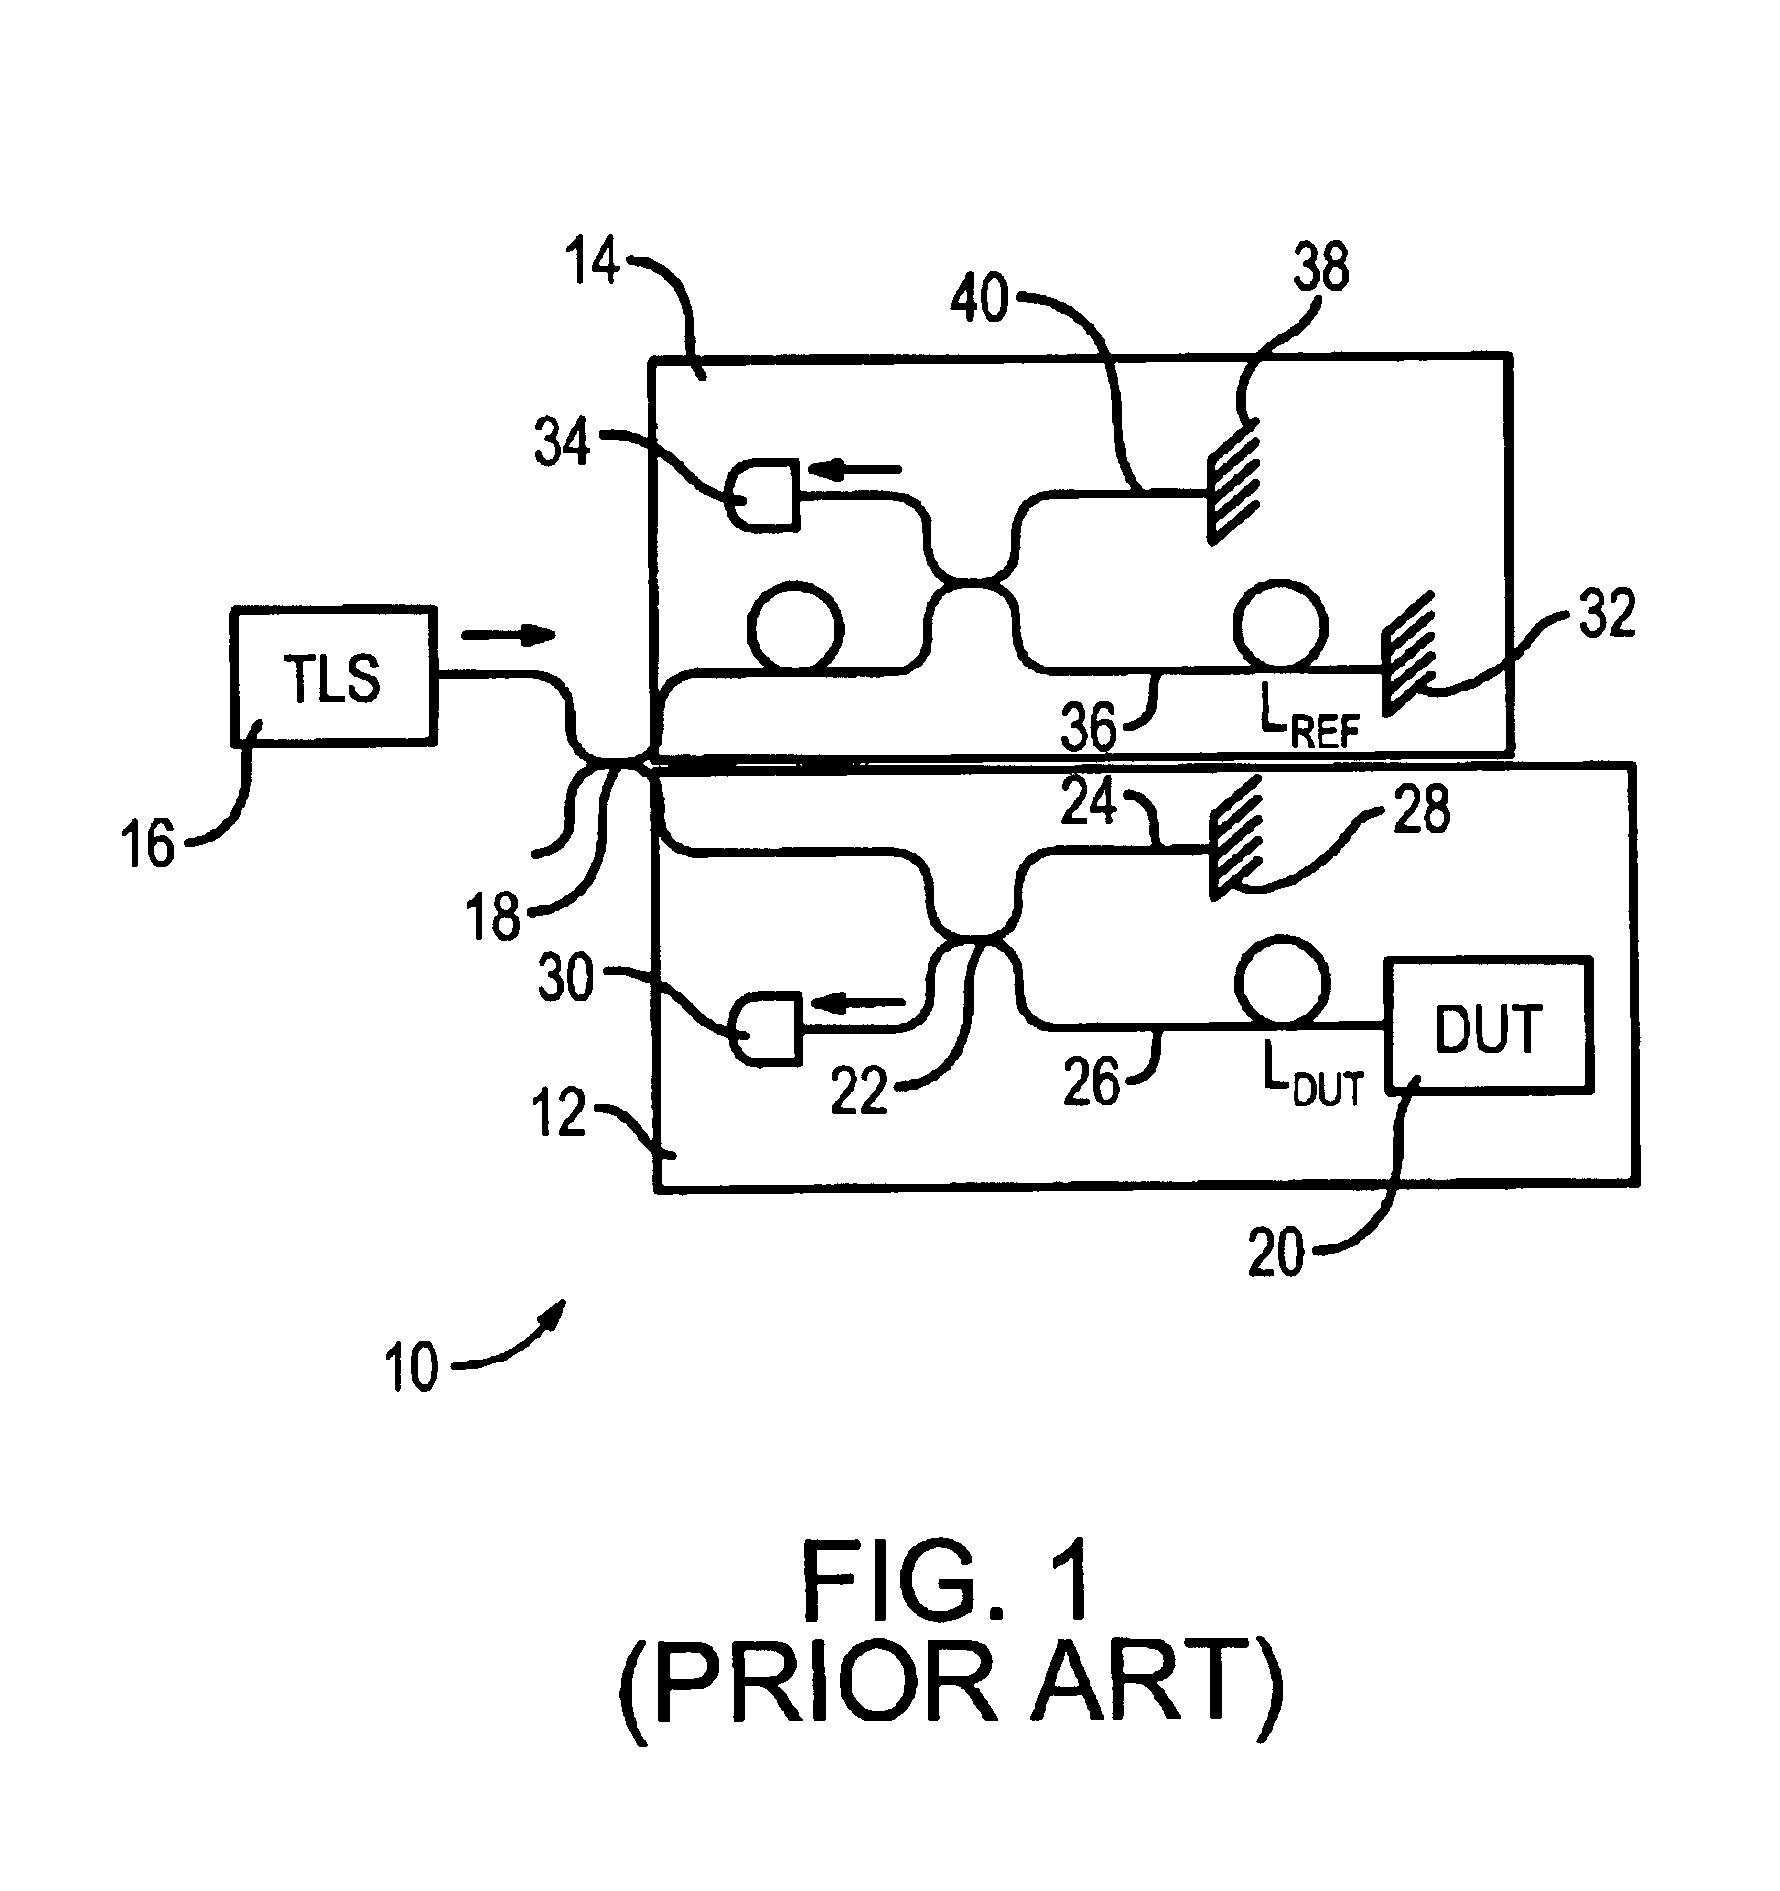 Phase noise compensation in an interferometric system